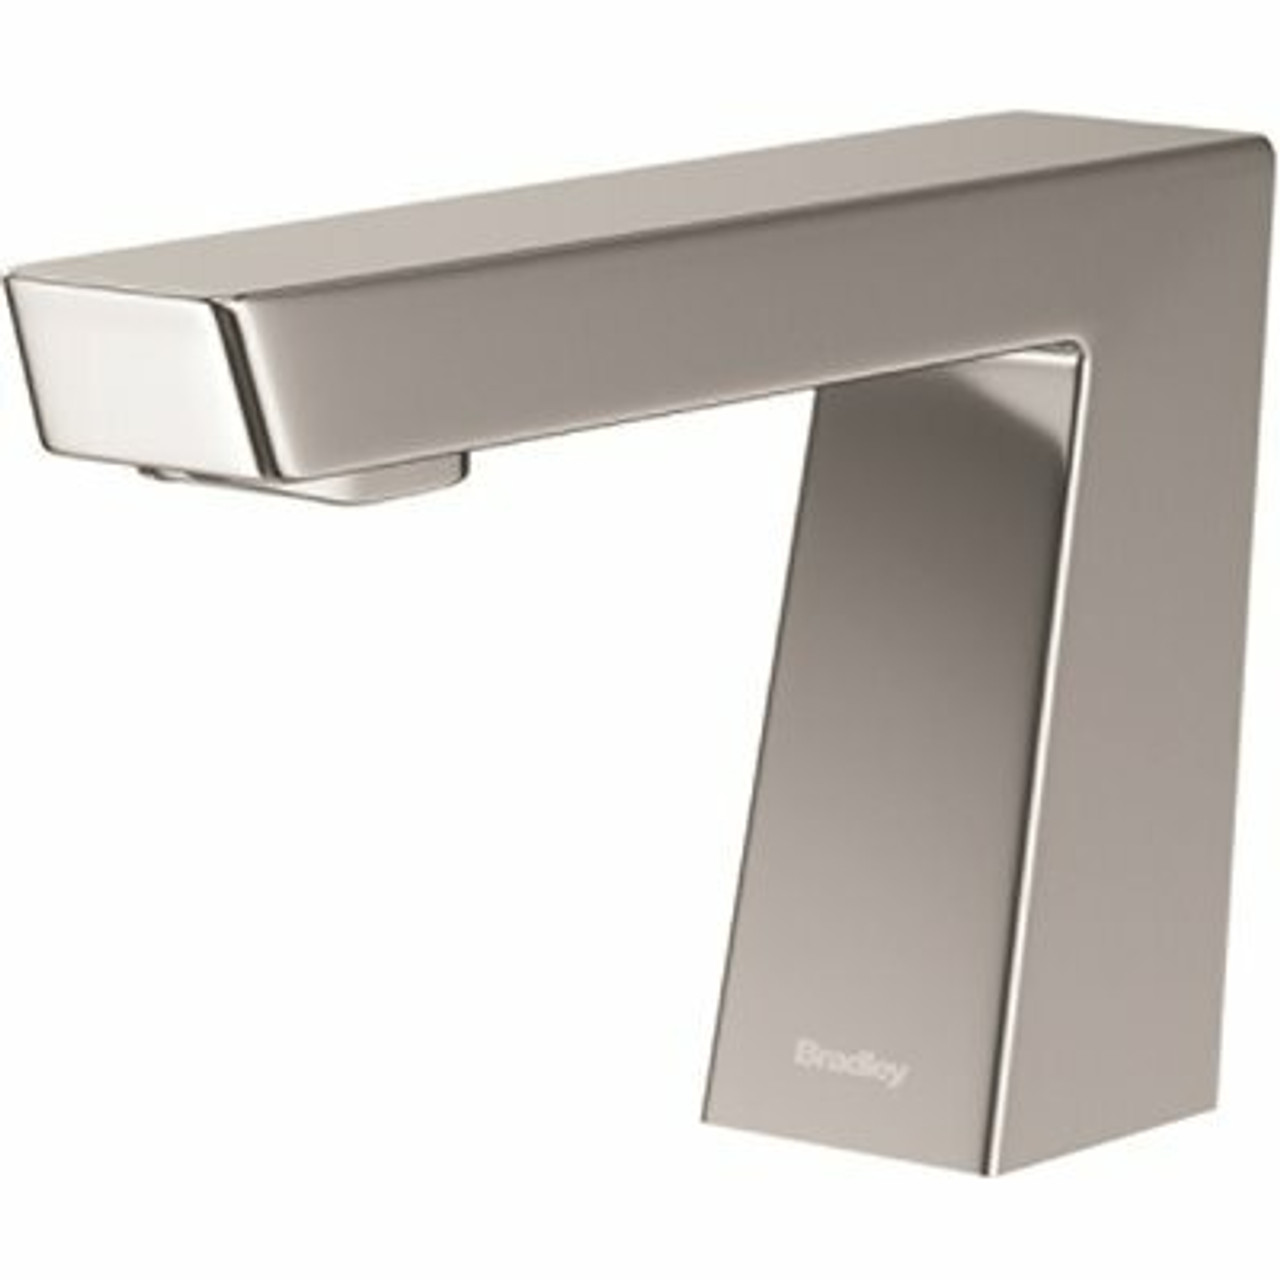 Bradley Zen Verge Faucet In Polished Chrome - 313831453